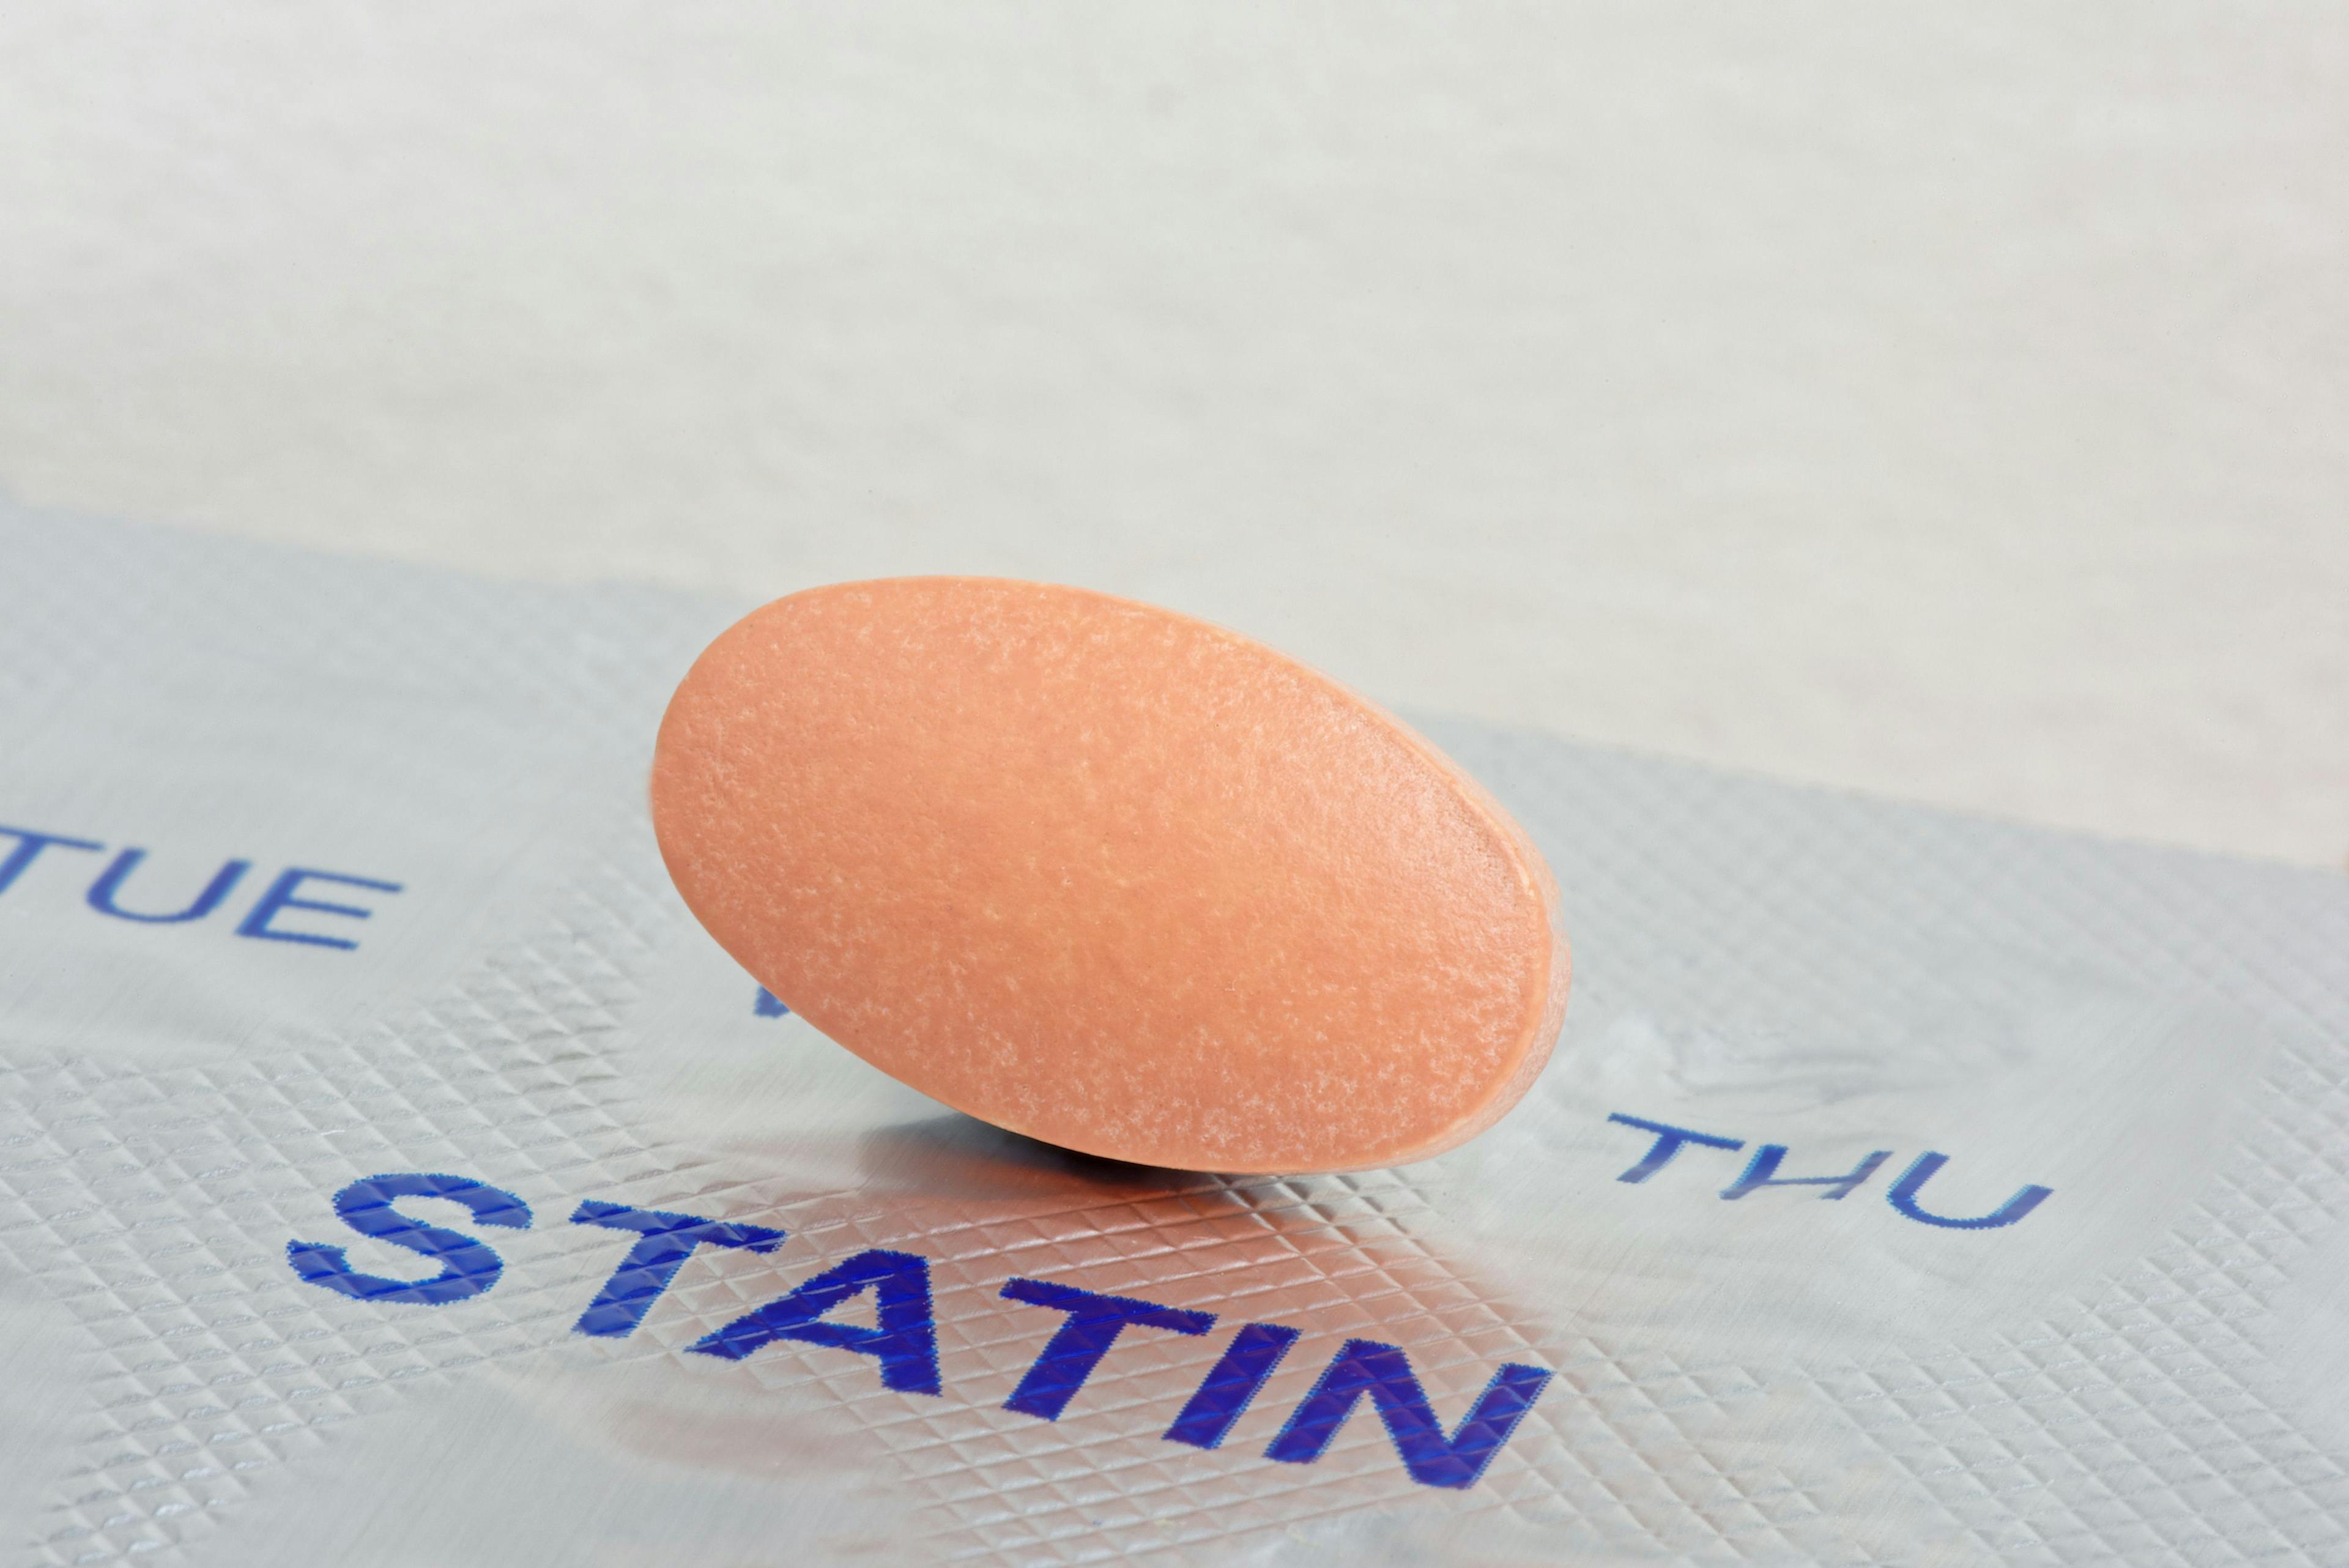 Statin Use Lowers Mortality Among Patients with Diabetes Hospitalized with COVID-19